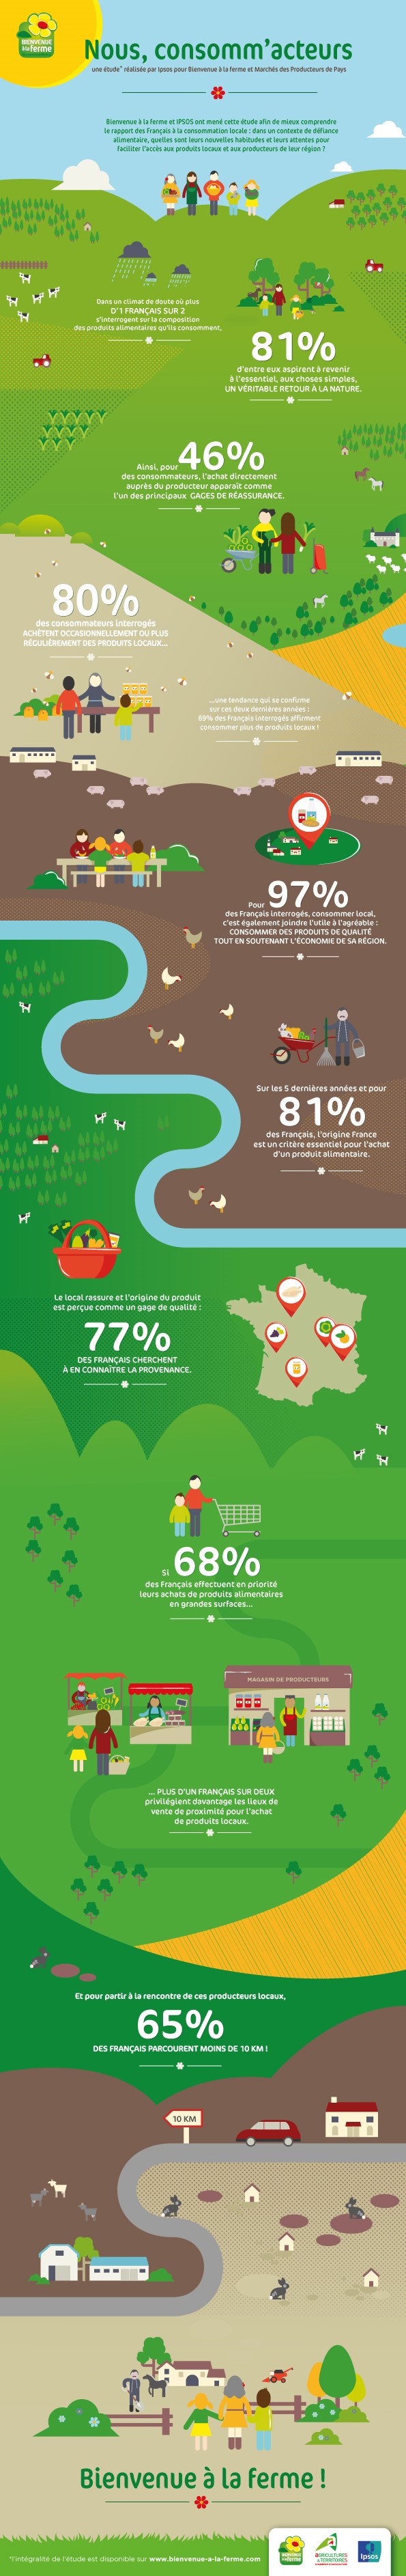 infographie_consommation-locale-2014